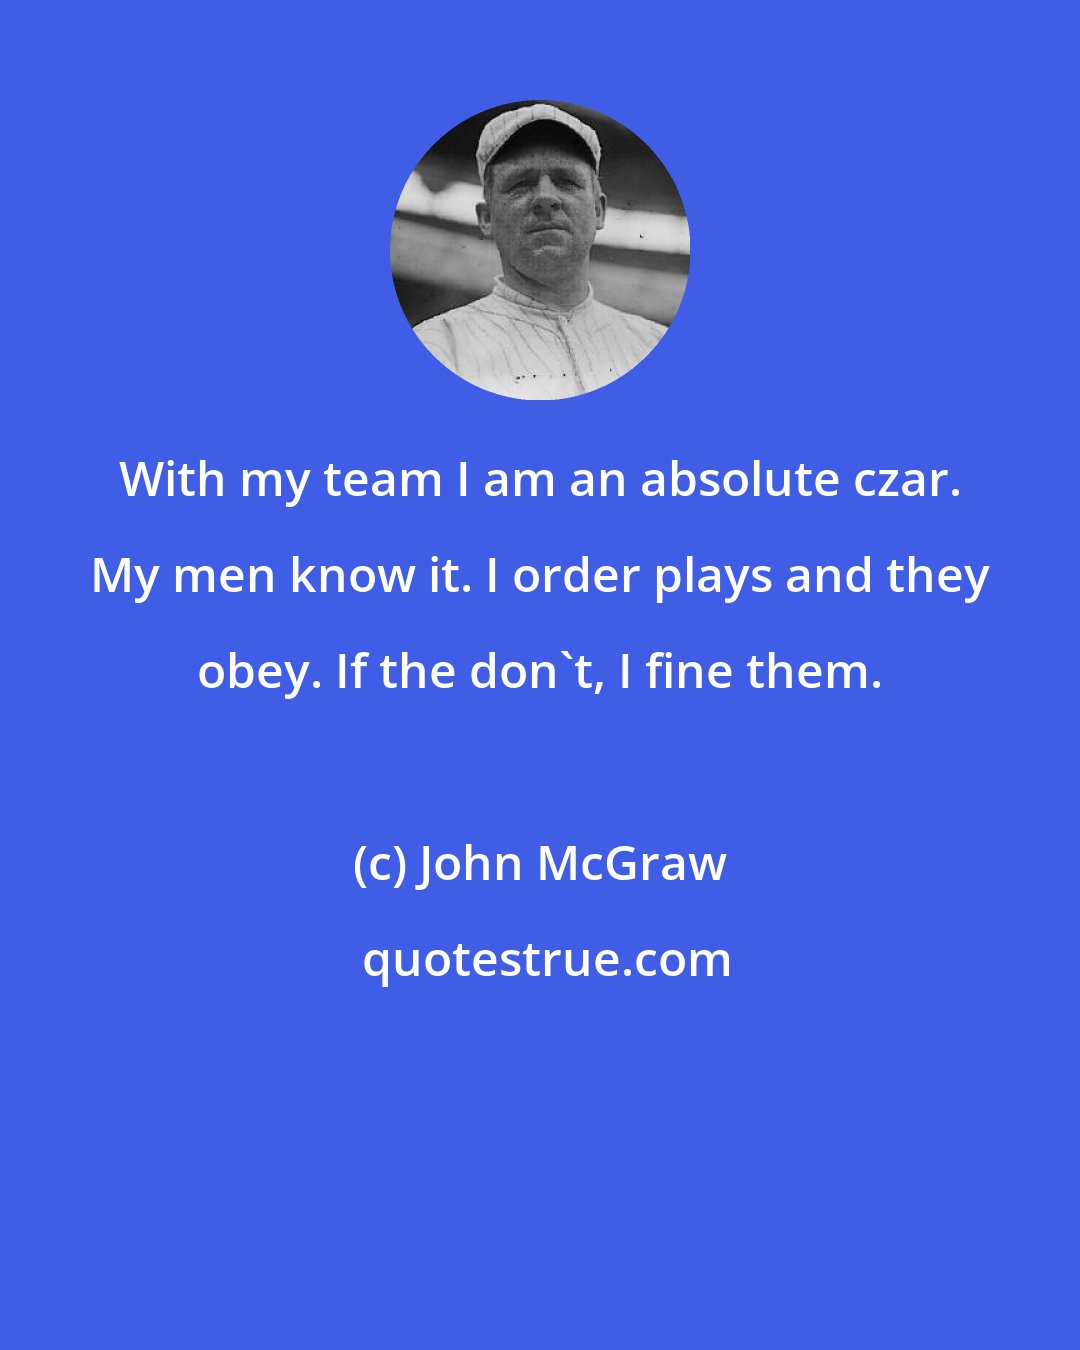 John McGraw: With my team I am an absolute czar. My men know it. I order plays and they obey. If the don't, I fine them.